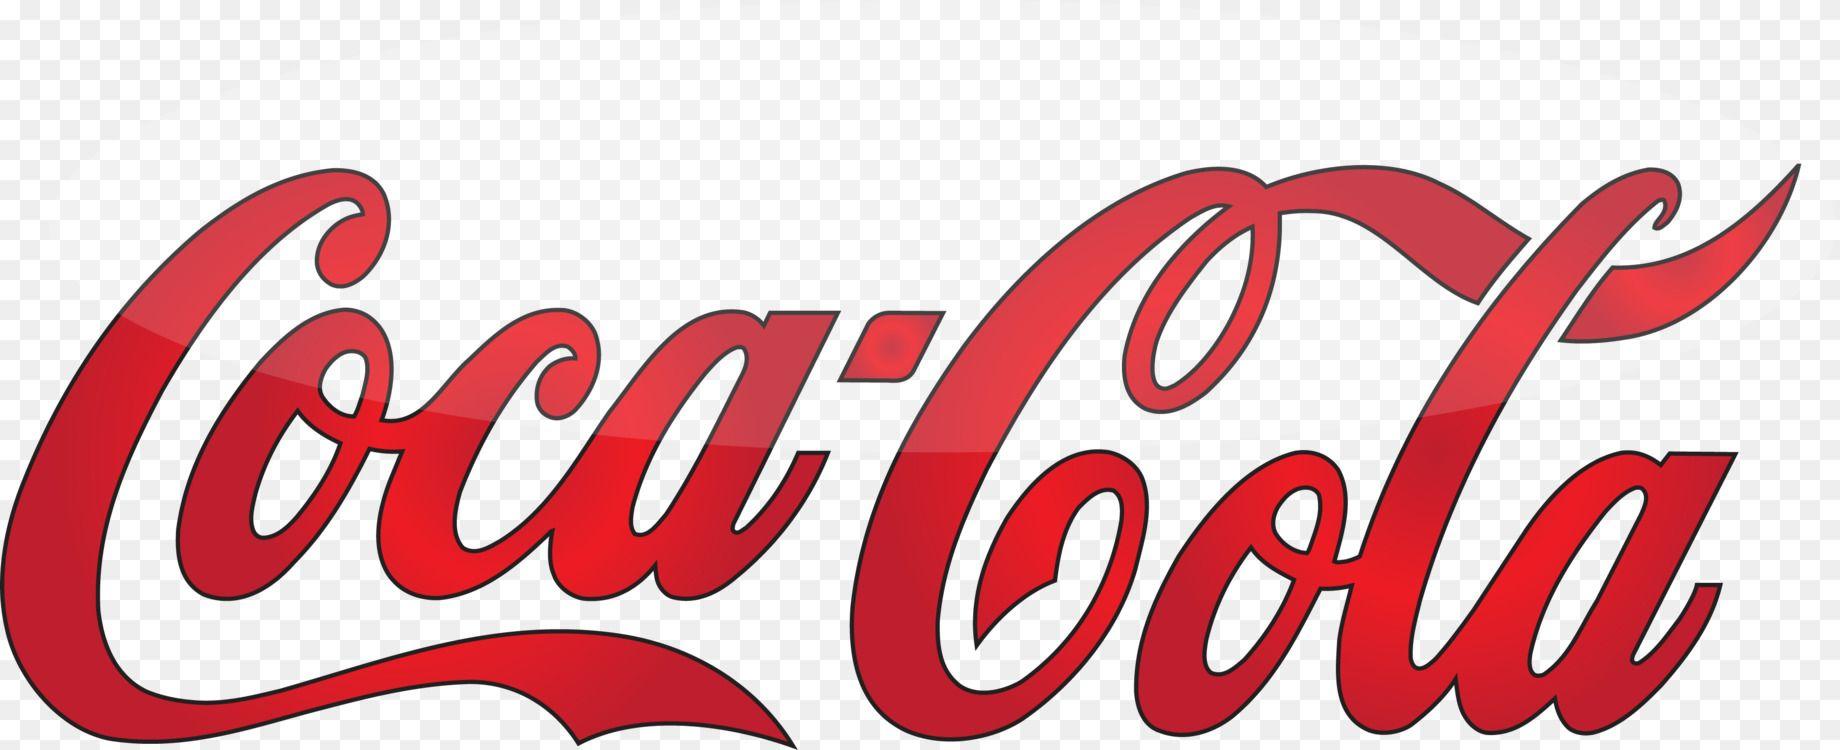 Diet Coke Logo - The Coca Cola Company Diet Coke Fizzy Drinks Free PNG Image